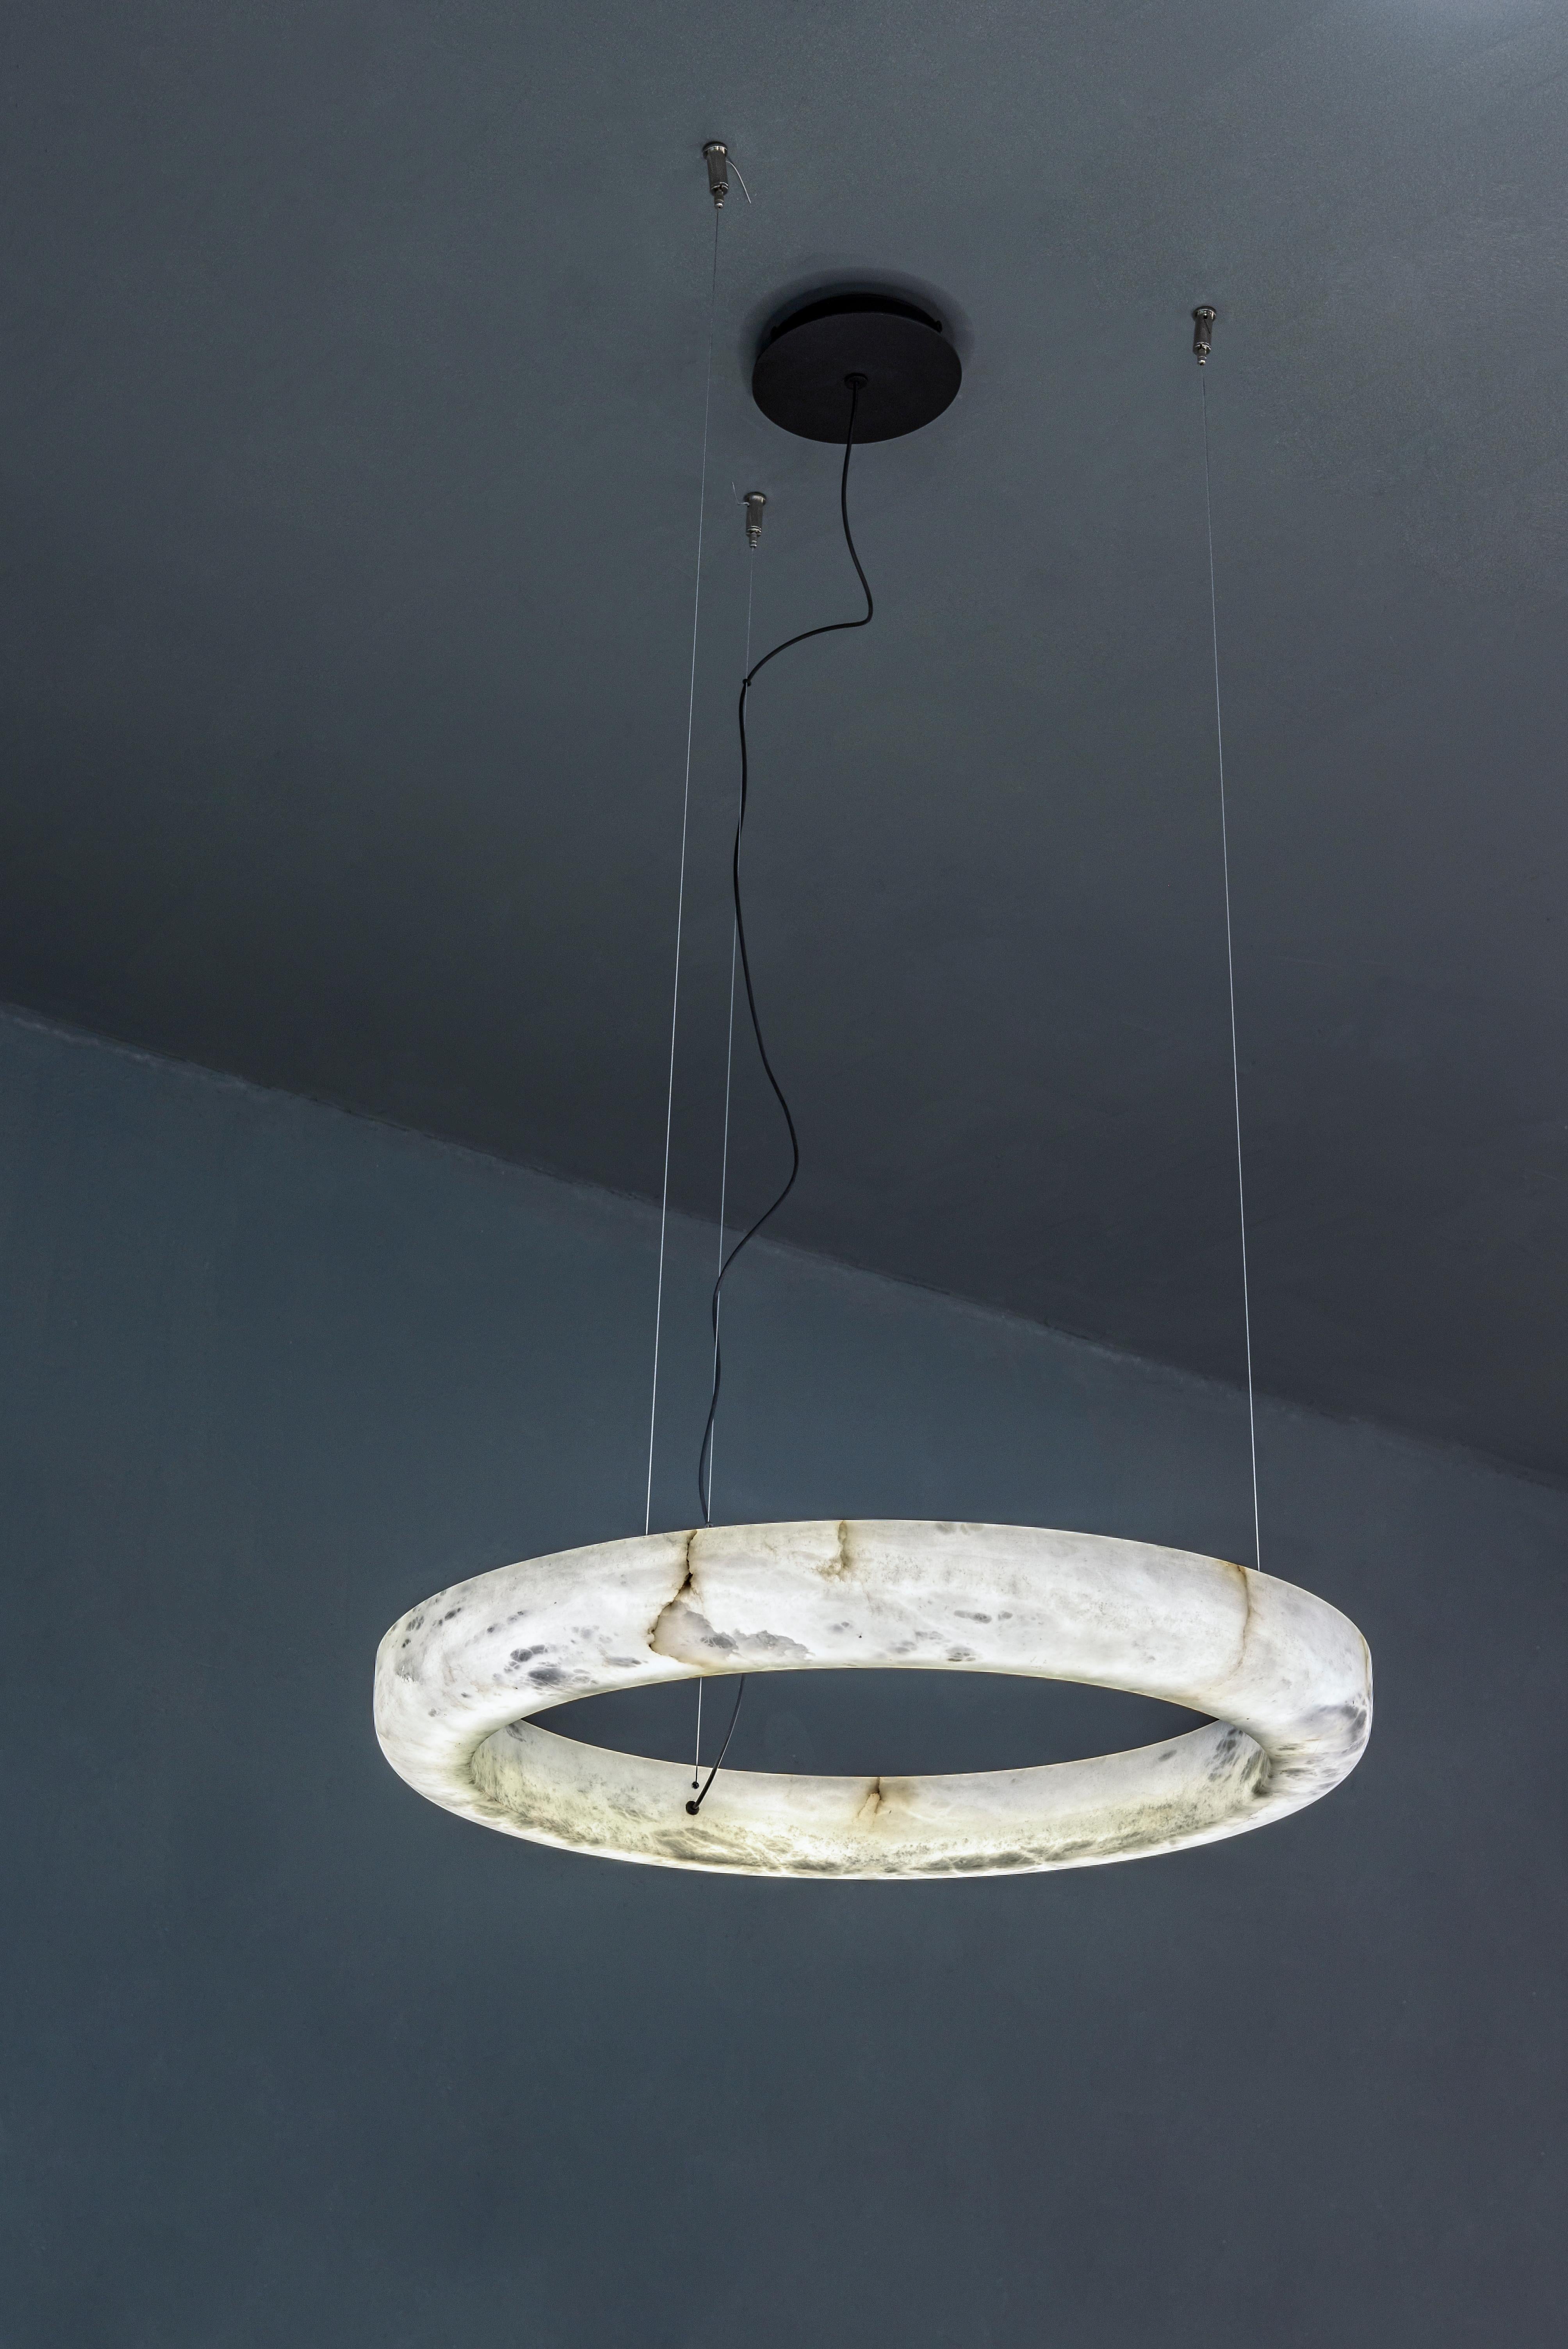 Ring 76 Pendant Lamp by United Alabaster
Dimensions: D 76 x H 200 cm
Materials: Alabaster

All our lamps can be wired according to each country. If sold to the USA it will be wired for the USA for instance.

A suspended alabaster ring with a